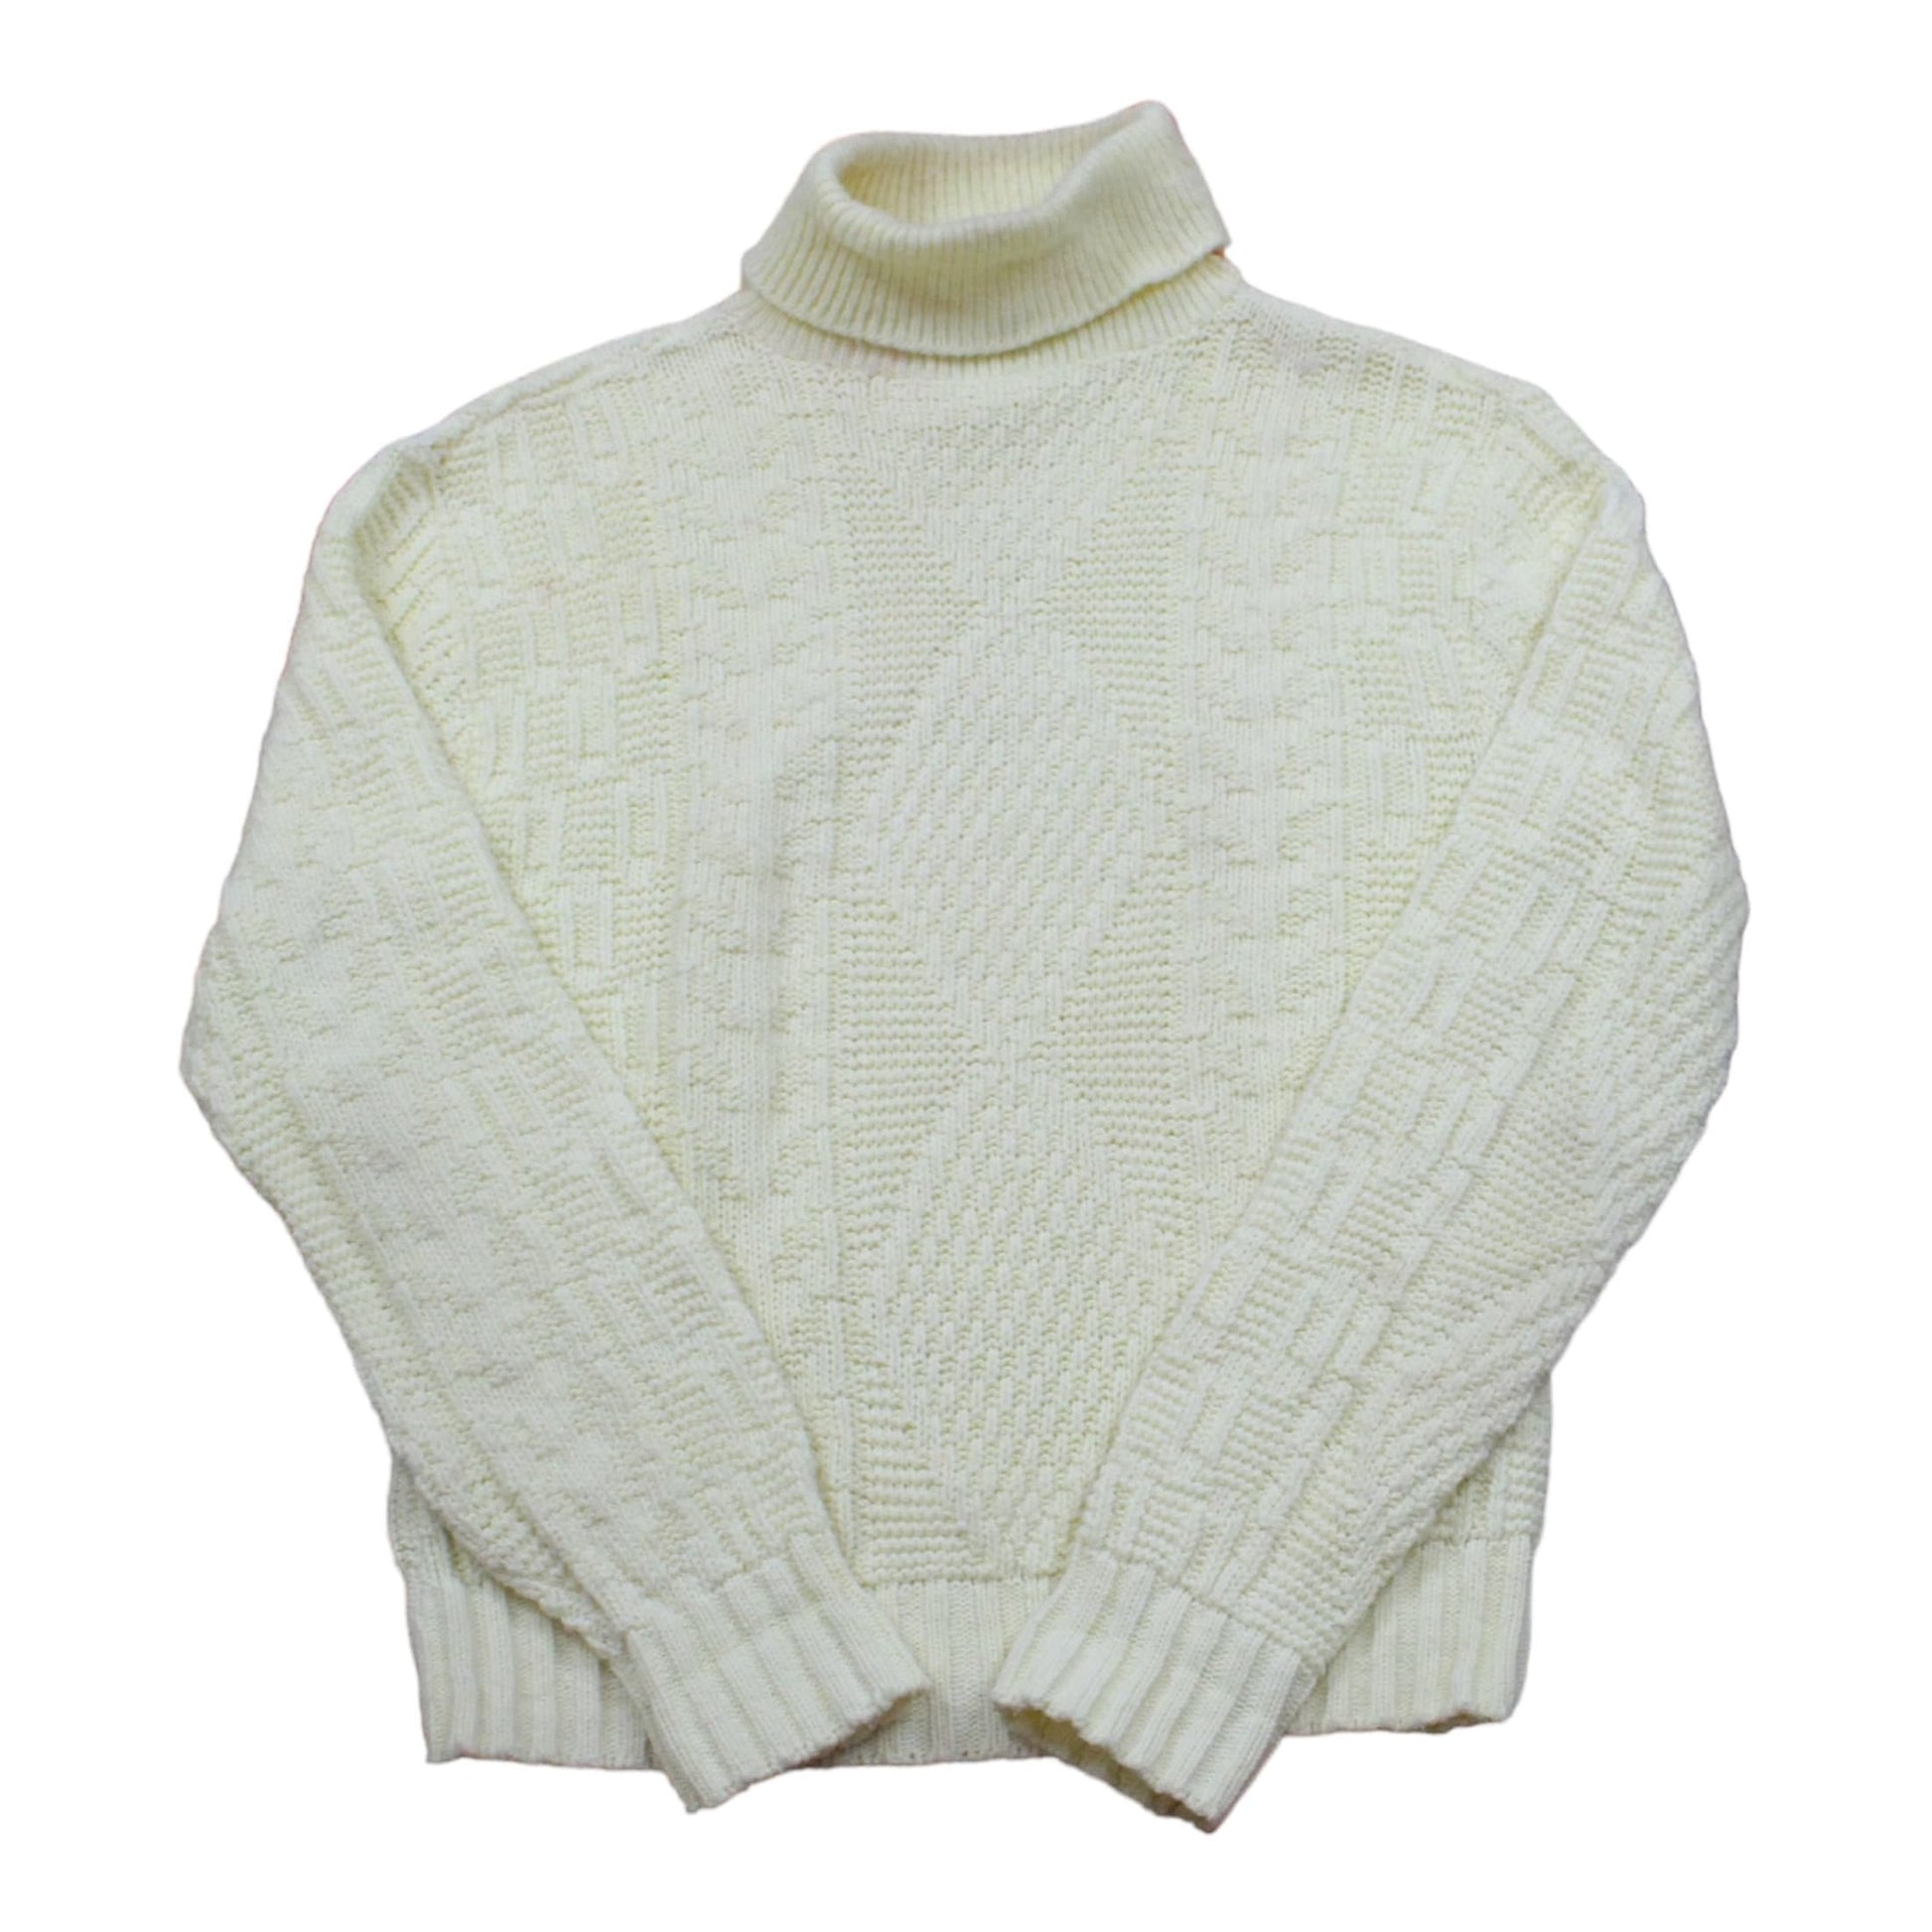 1980s/1990s Cory Cable Knit Acrylic Turtleneck Sweater Made in USA Size M